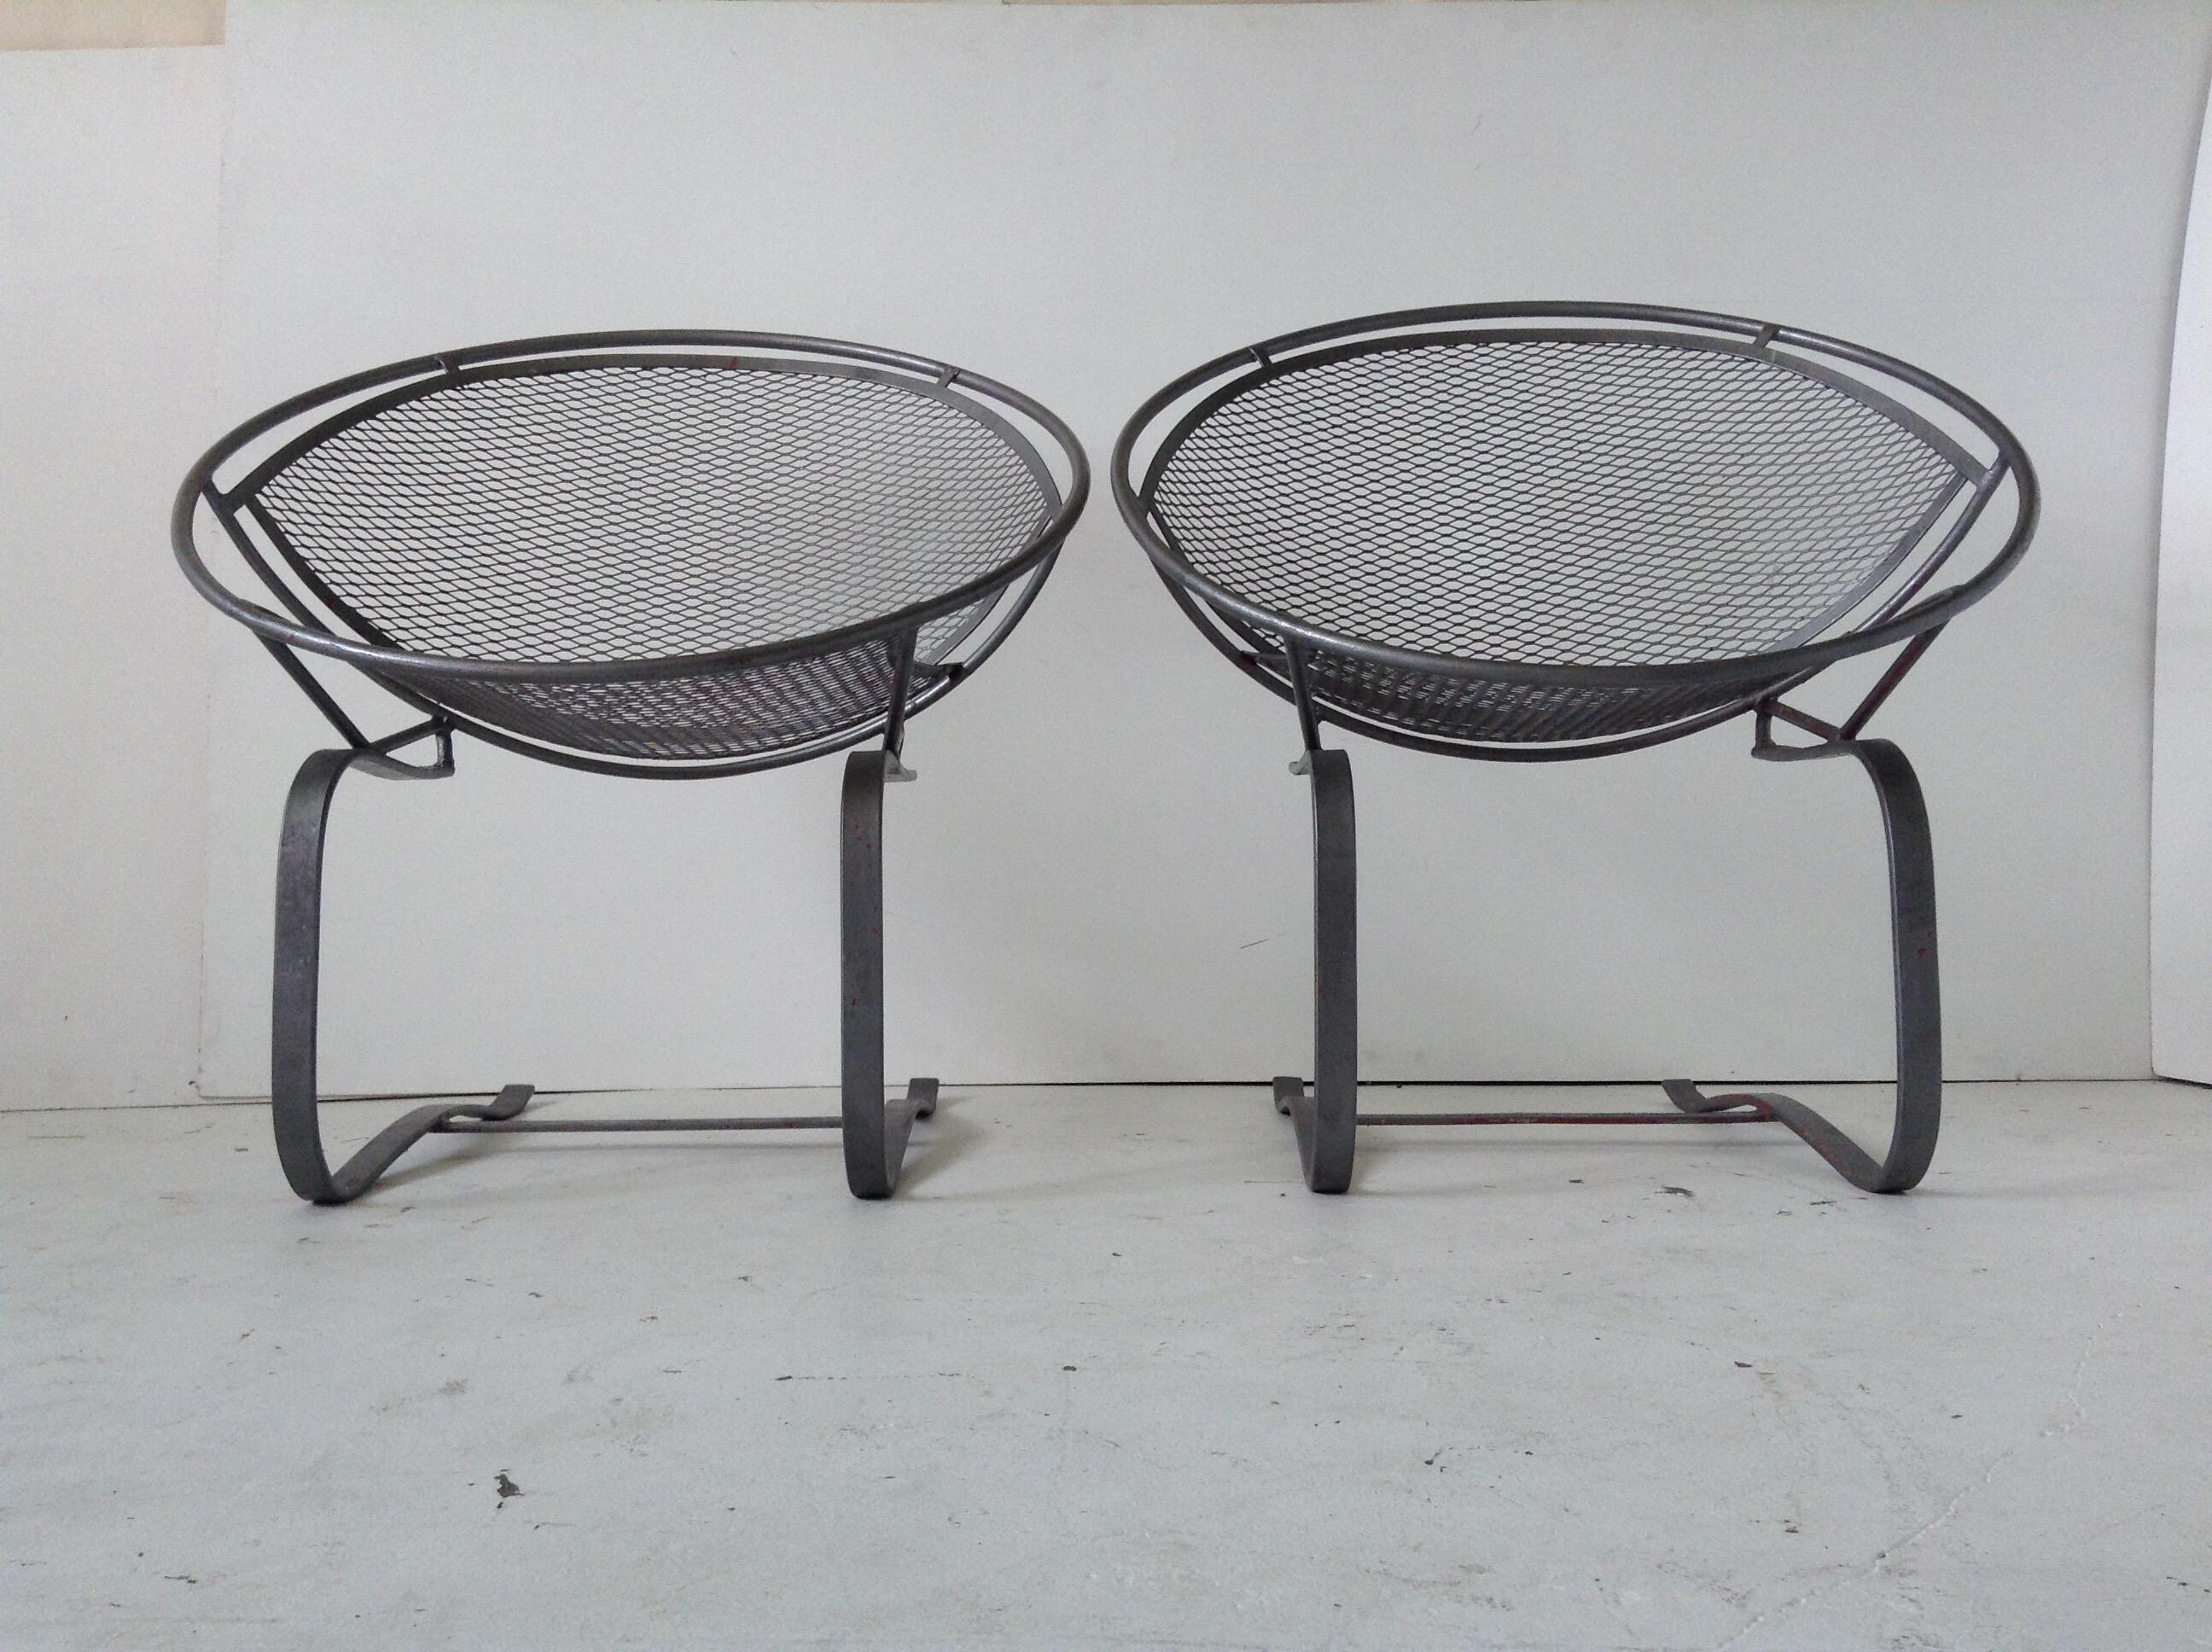 This is a nice looking set of original Woodard Salterini radar iron lounge chairs. These have the Springer base so you can rock in them for added comfort! They are vintage 1960s. They have been painted but used with some paint loss.